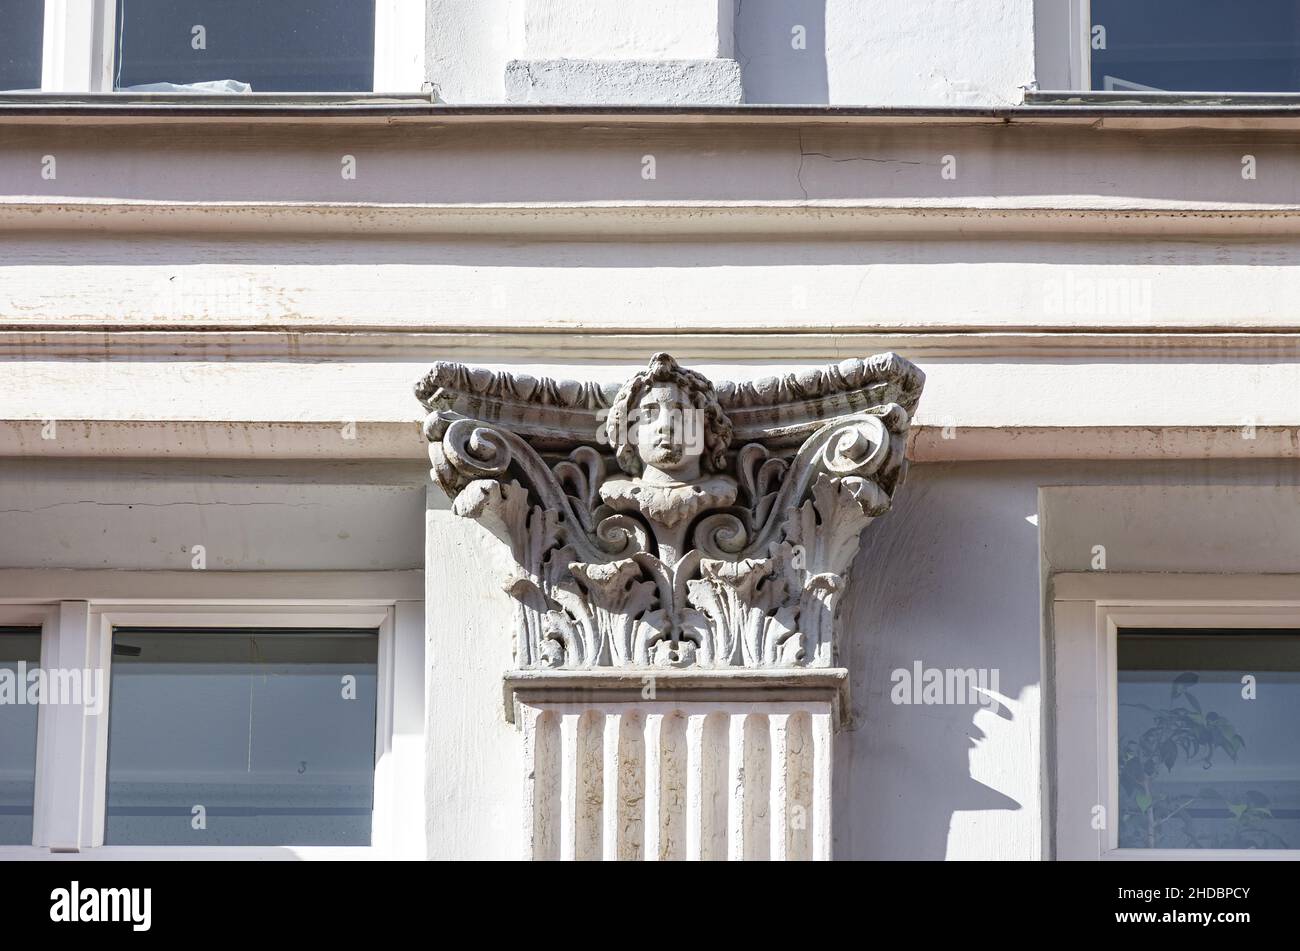 Facade detail of a face on a capital, residential and commercial building of Kröpeliner Straße No. 93, Hanseatic City of Rostock, Germany. Stock Photo